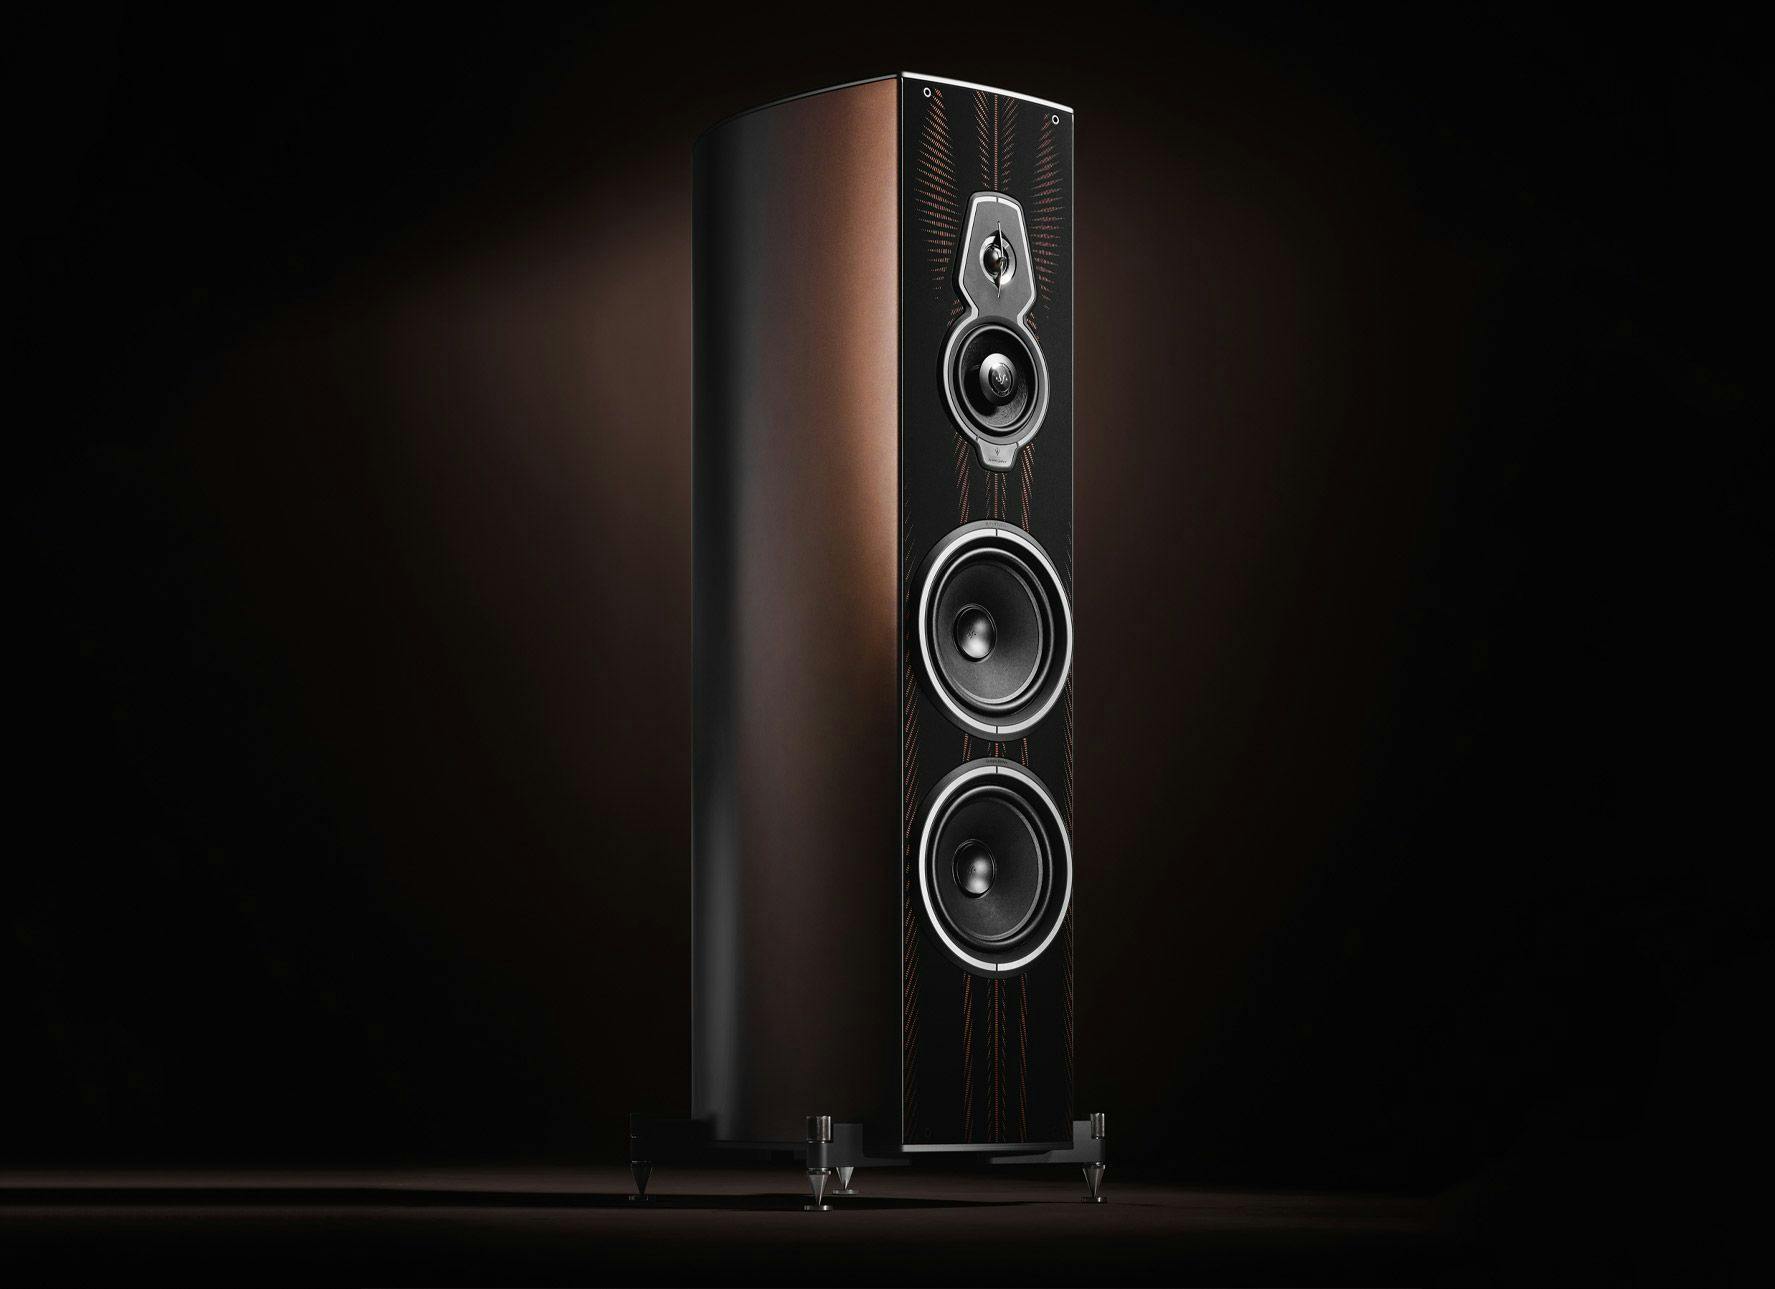 A Maserati-inspired high-fidelity floor-standing speaker by Sonus Faber, part of the Amati Folgore collection, showcasing a sleek dark finish.